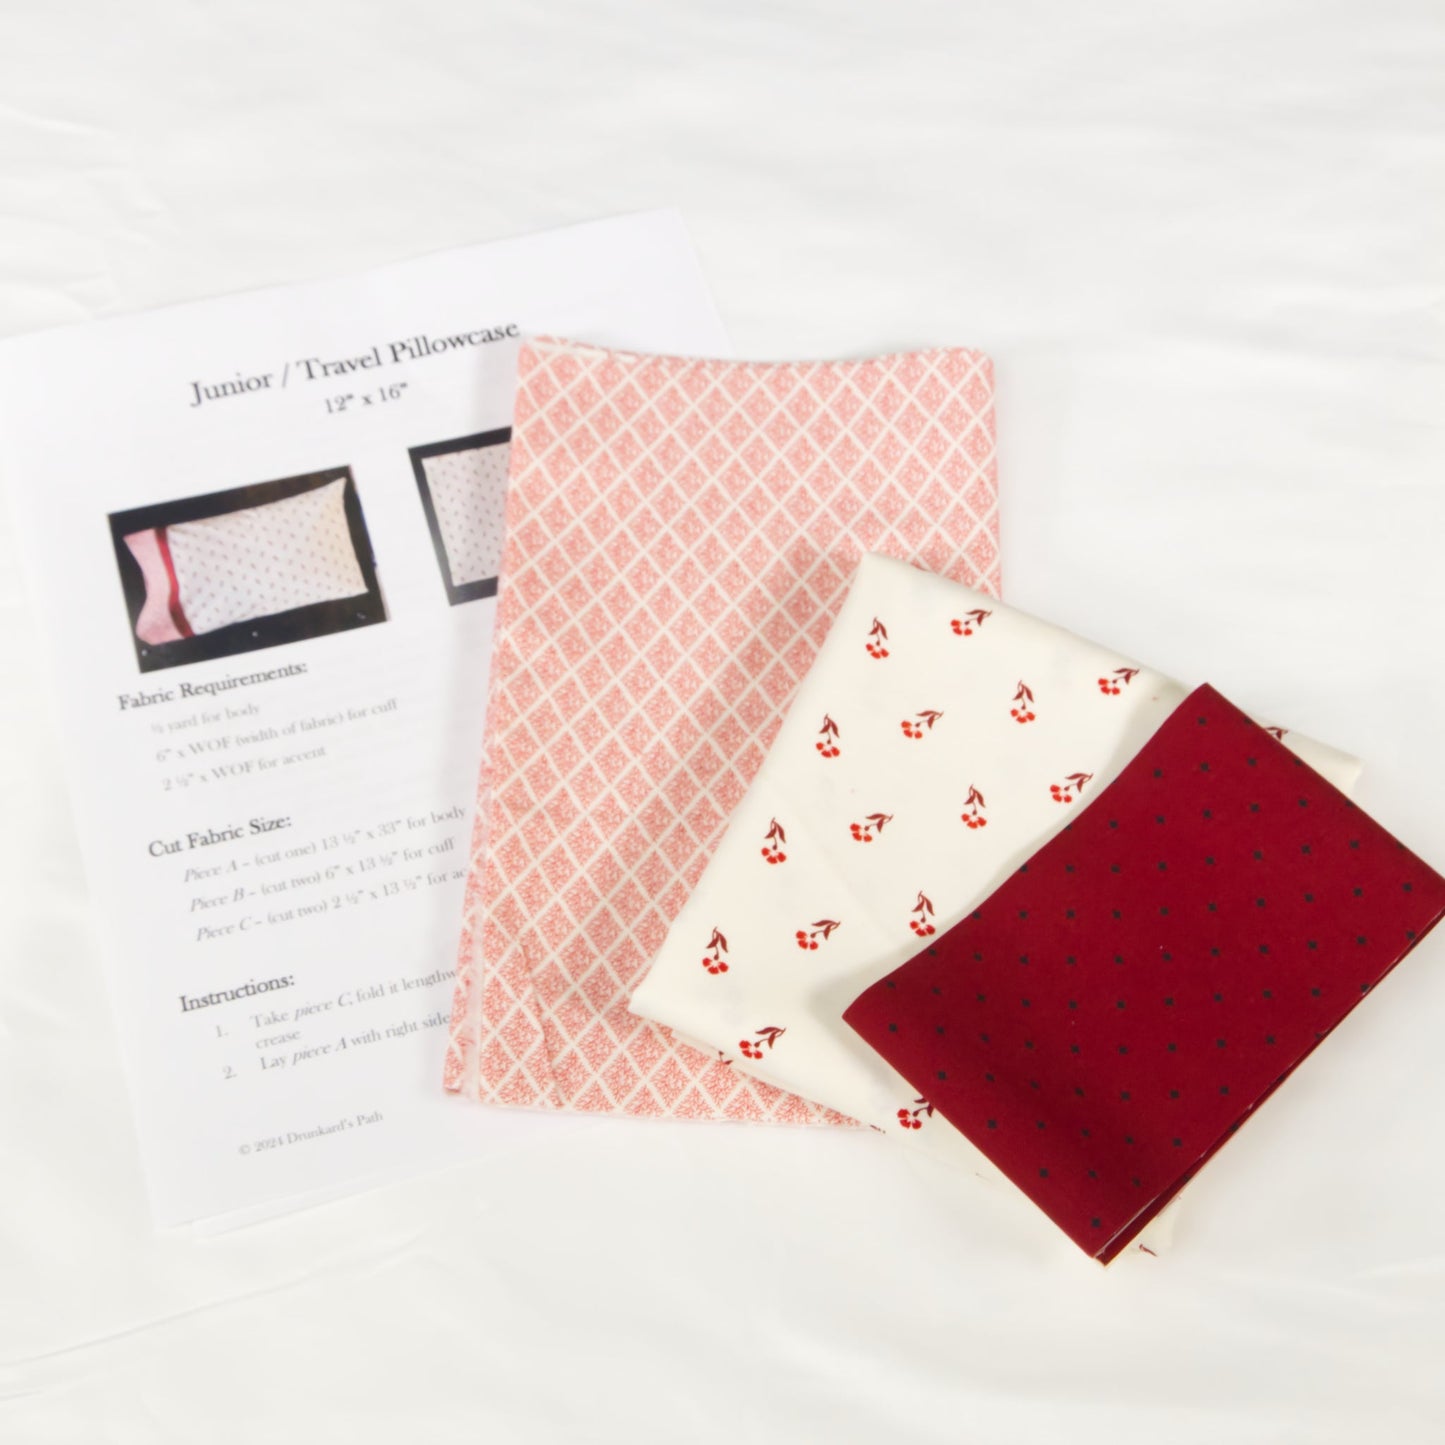 Image of Junior/Travel Pillowcase Kit - Red and White Gatherings